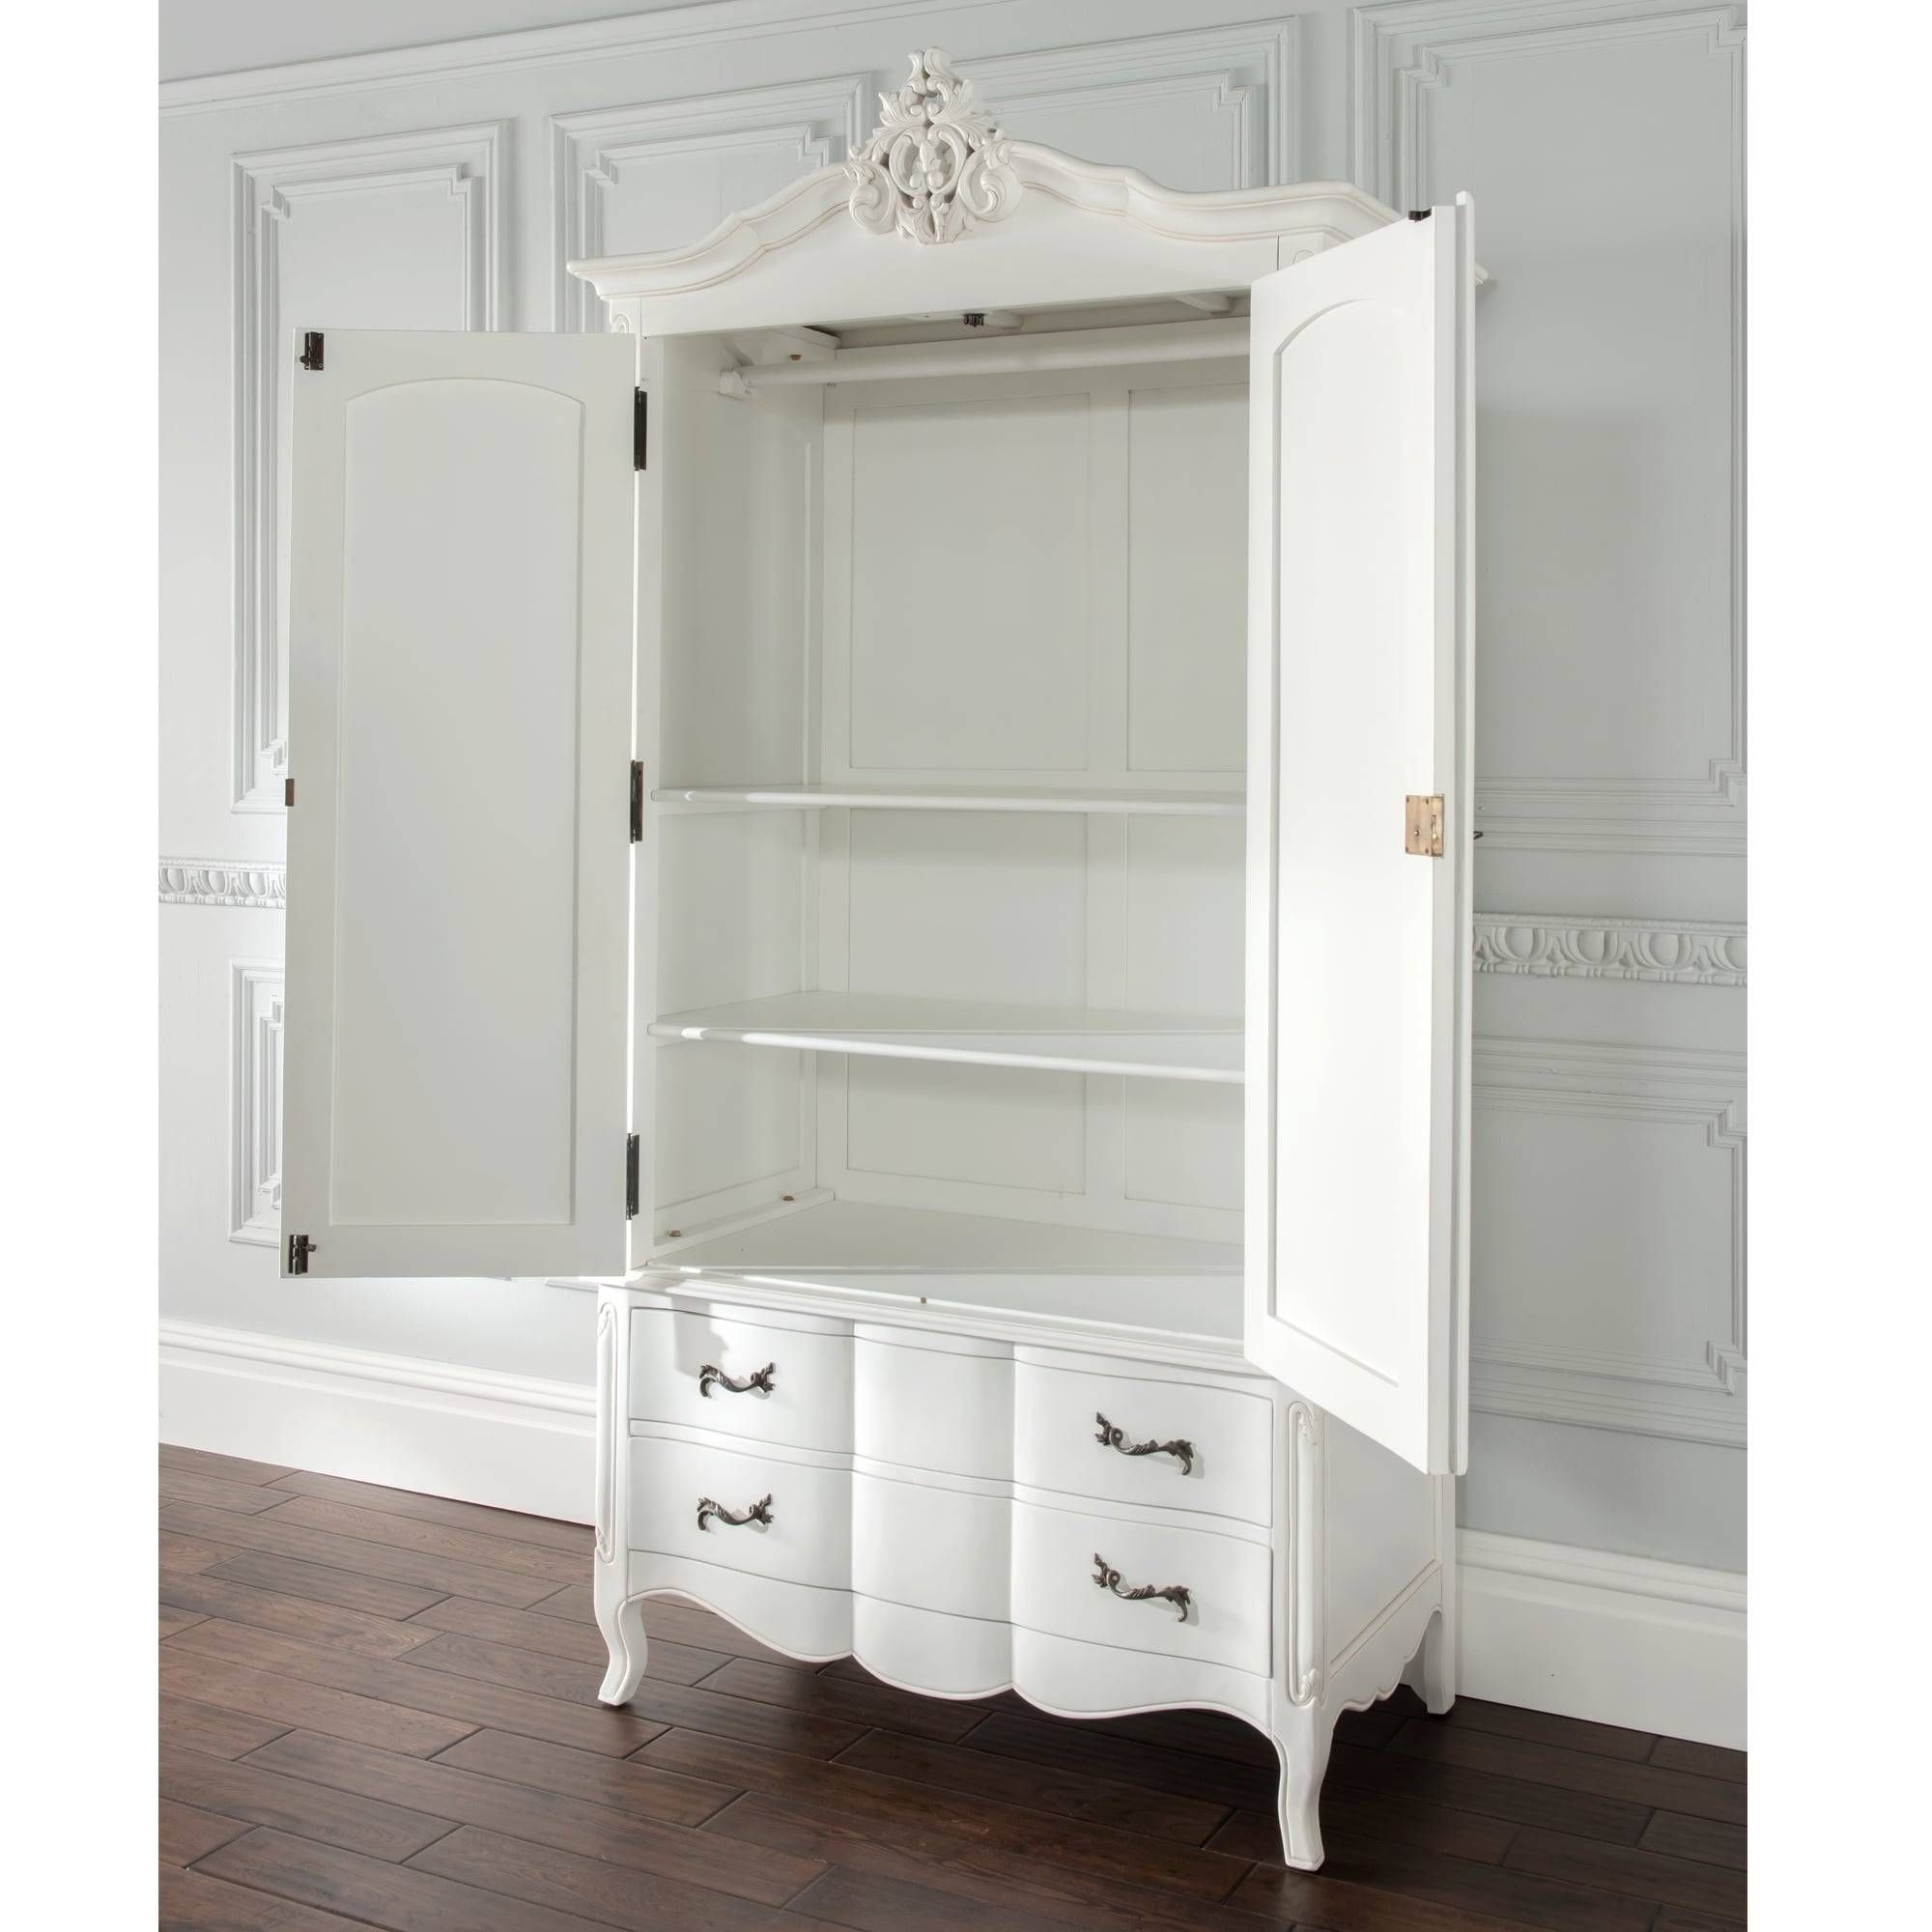 Estelle Antique French Style Wardrobe | French Style Furniture Regarding White French Style Wardrobes (View 14 of 15)